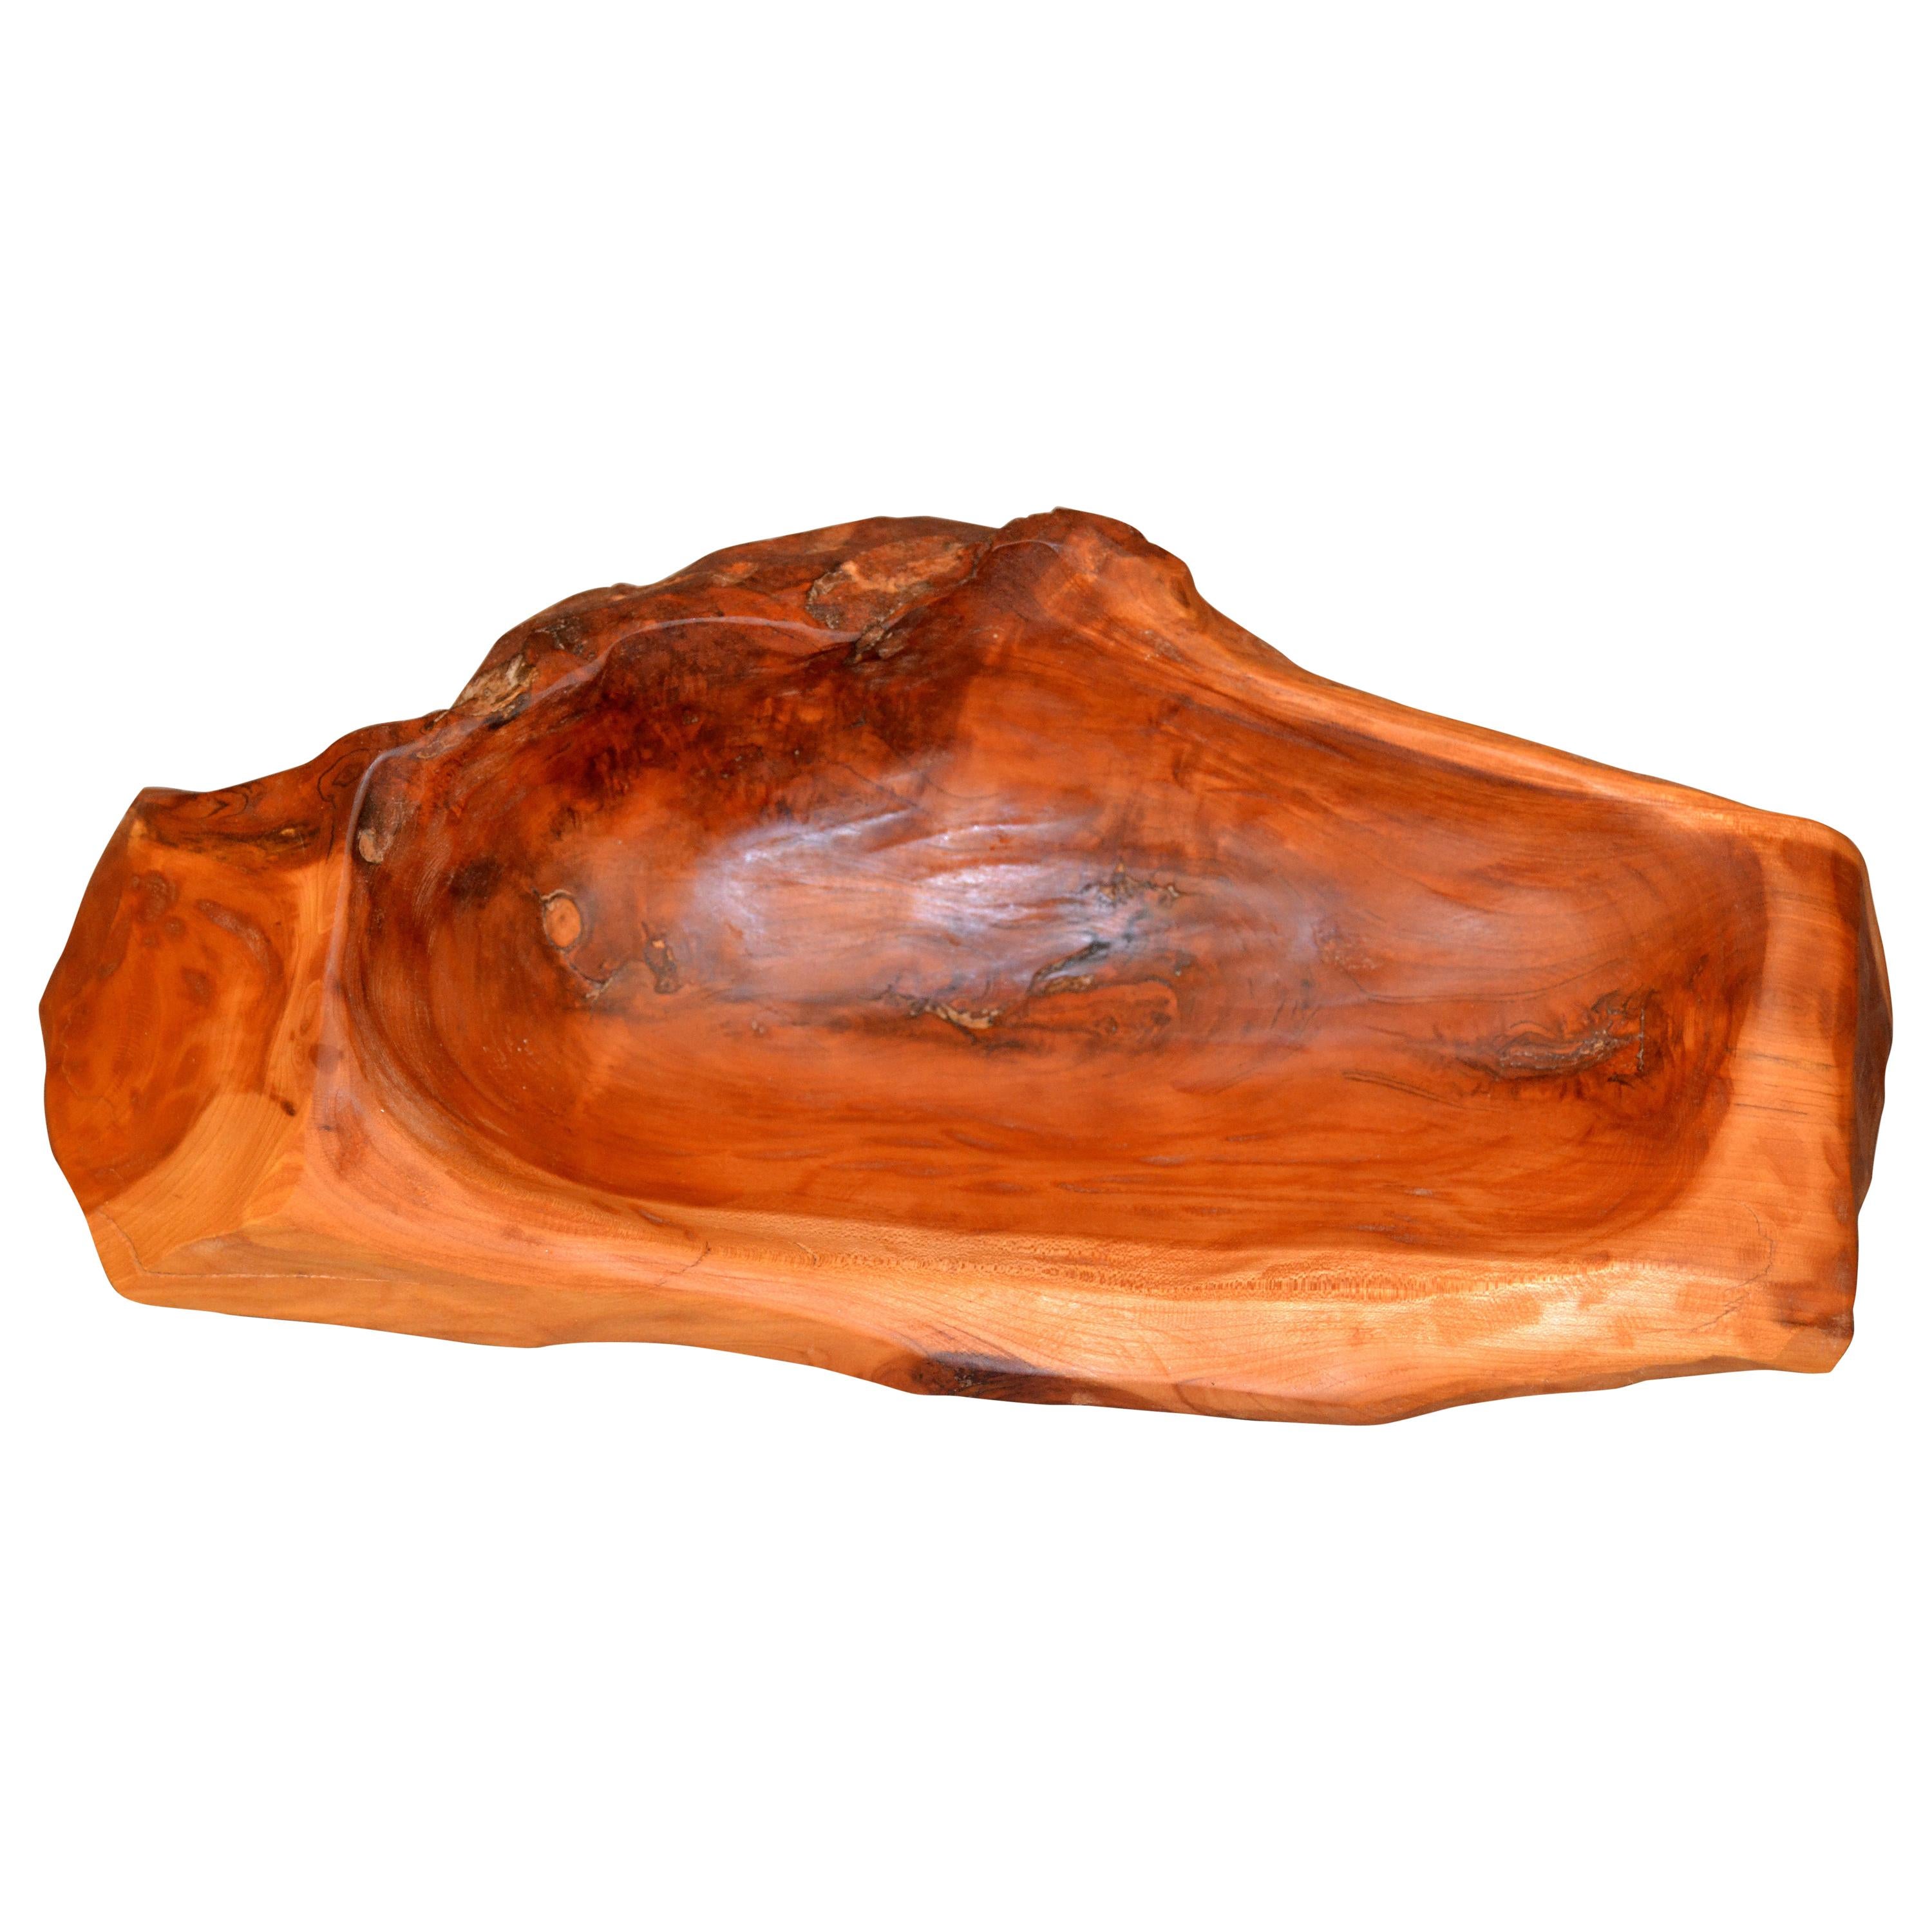 American Organic Modern Handcrafted Hardwood Decorative Serving Tray Centerpiece For Sale